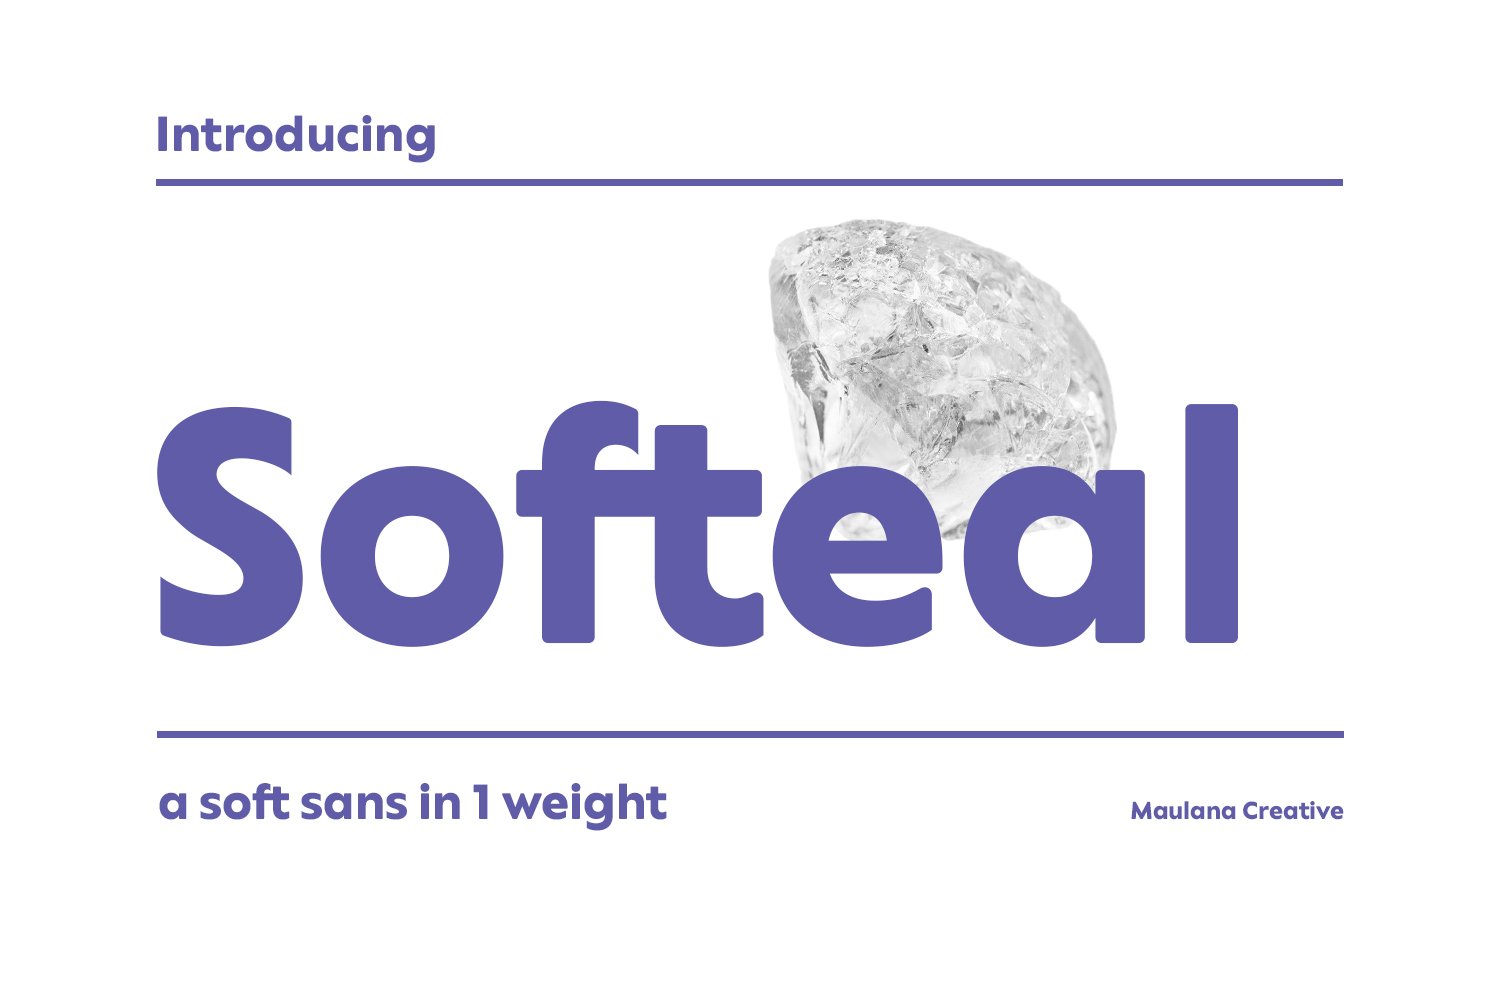 Softeal Sans Family Font cover image.